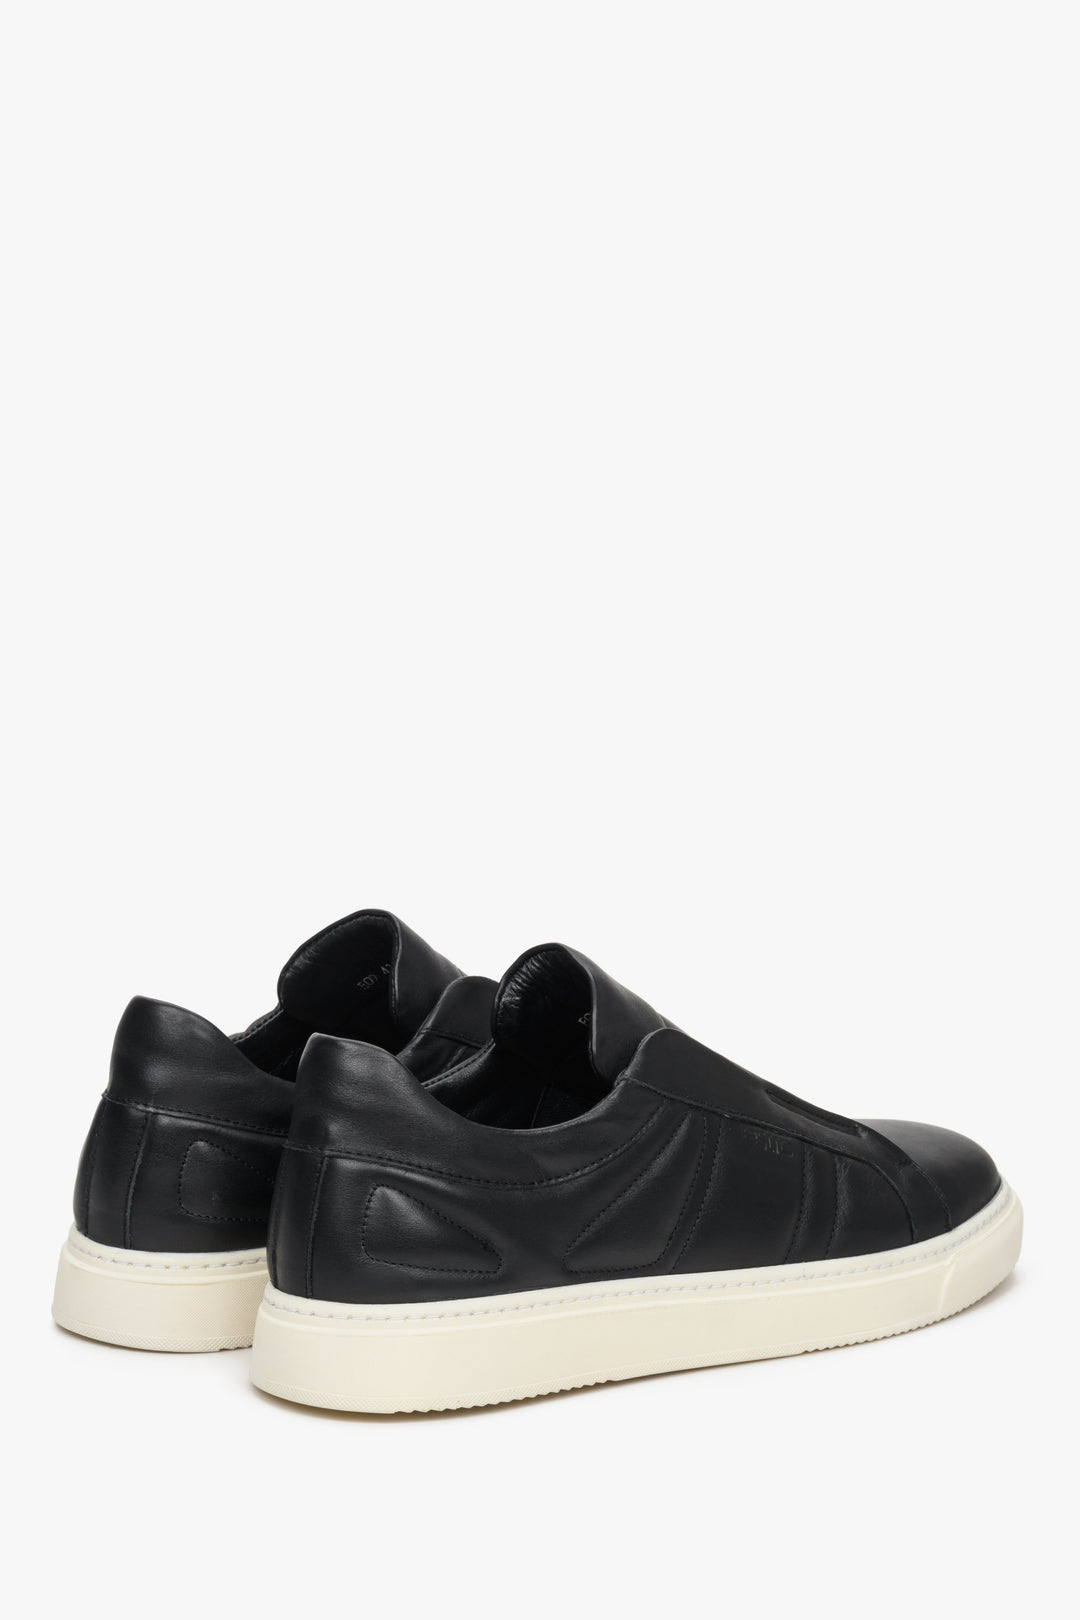 Black Estro men's leather slip-on sneakers without laces - close-up of the heel.